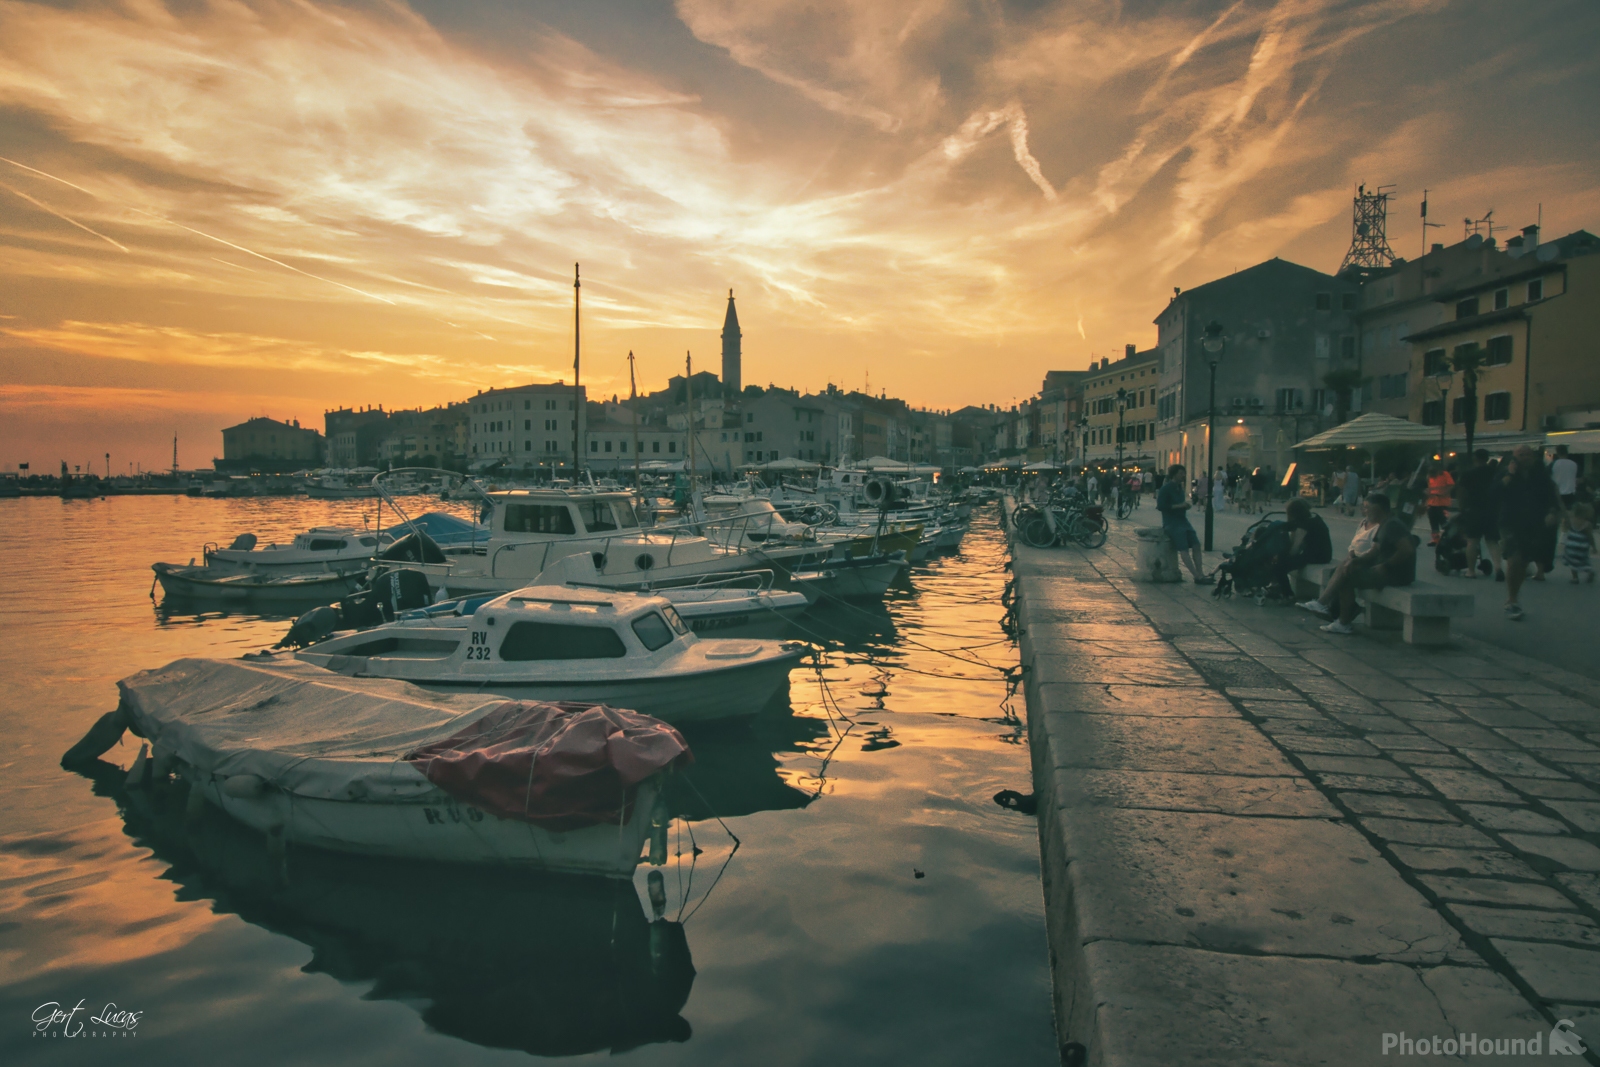 Image of Rovinj Harbour View by Gert Lucas